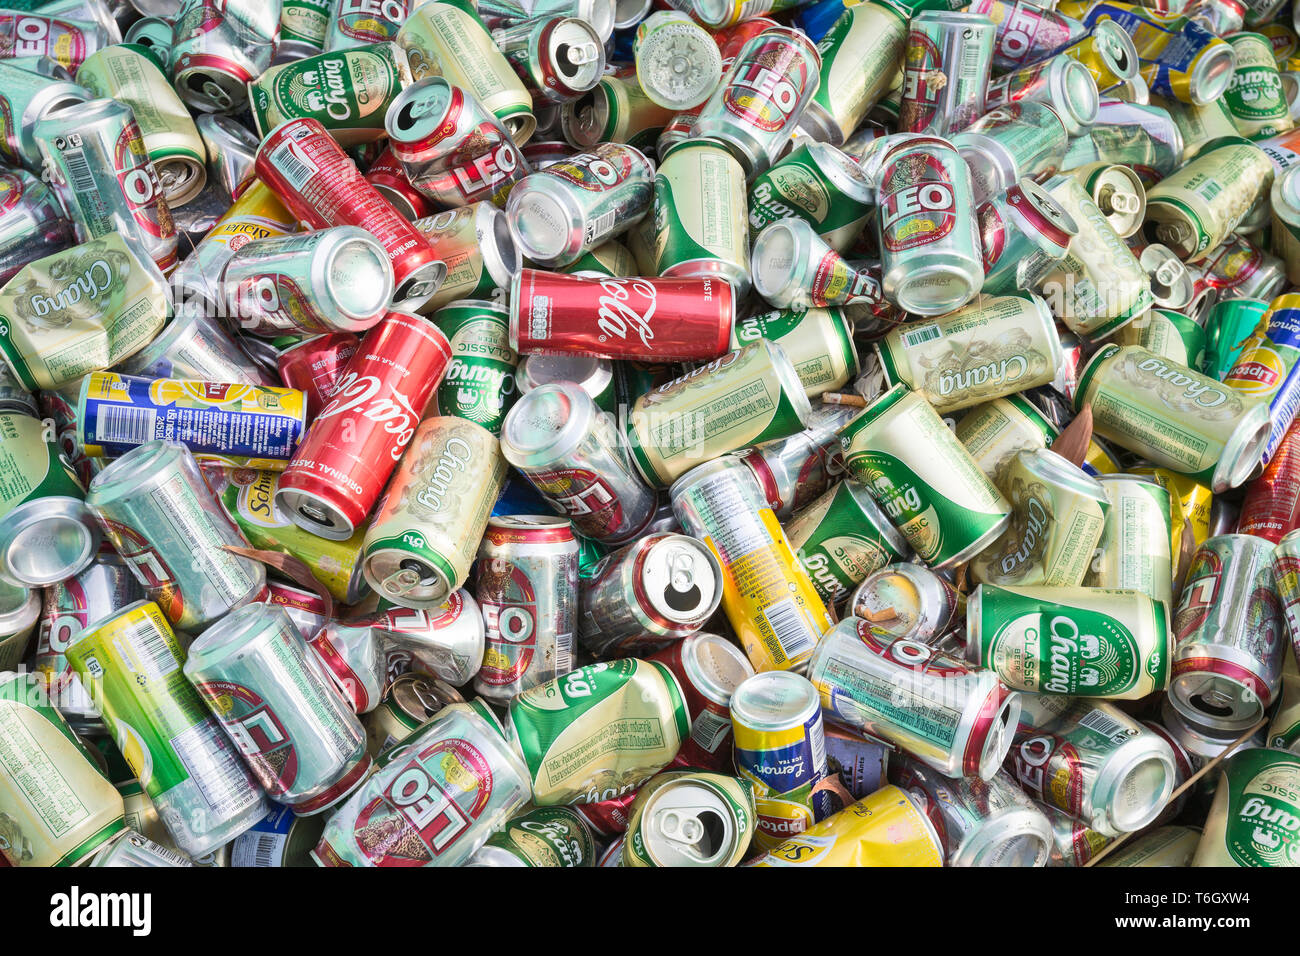 Aluminium cans for recycling Stock Photo - Alamy